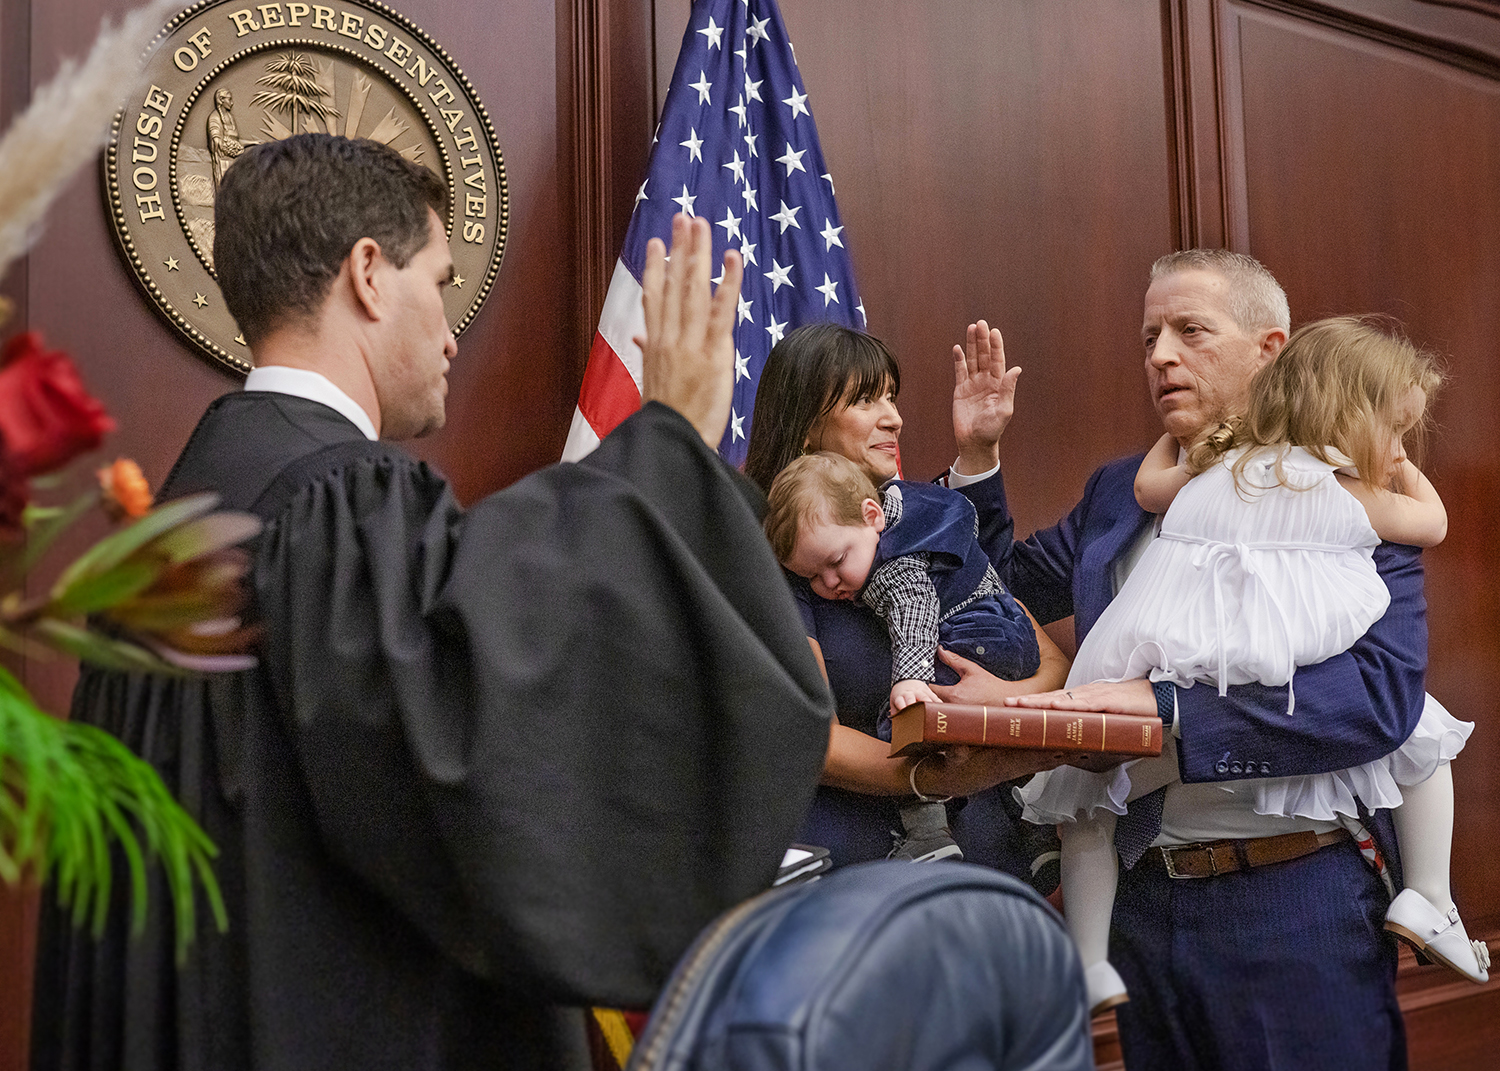 Florida Supreme Court Justice John D. Couriel, administers the oath of office for Speaker of the Florida House of Representatives to Paul Renner, R-Palm Coast, shown with his wife Adriana and their children, William Andrew and Abigal, in the House chamber during Organization Session of the Legislature, November 22, 2022.